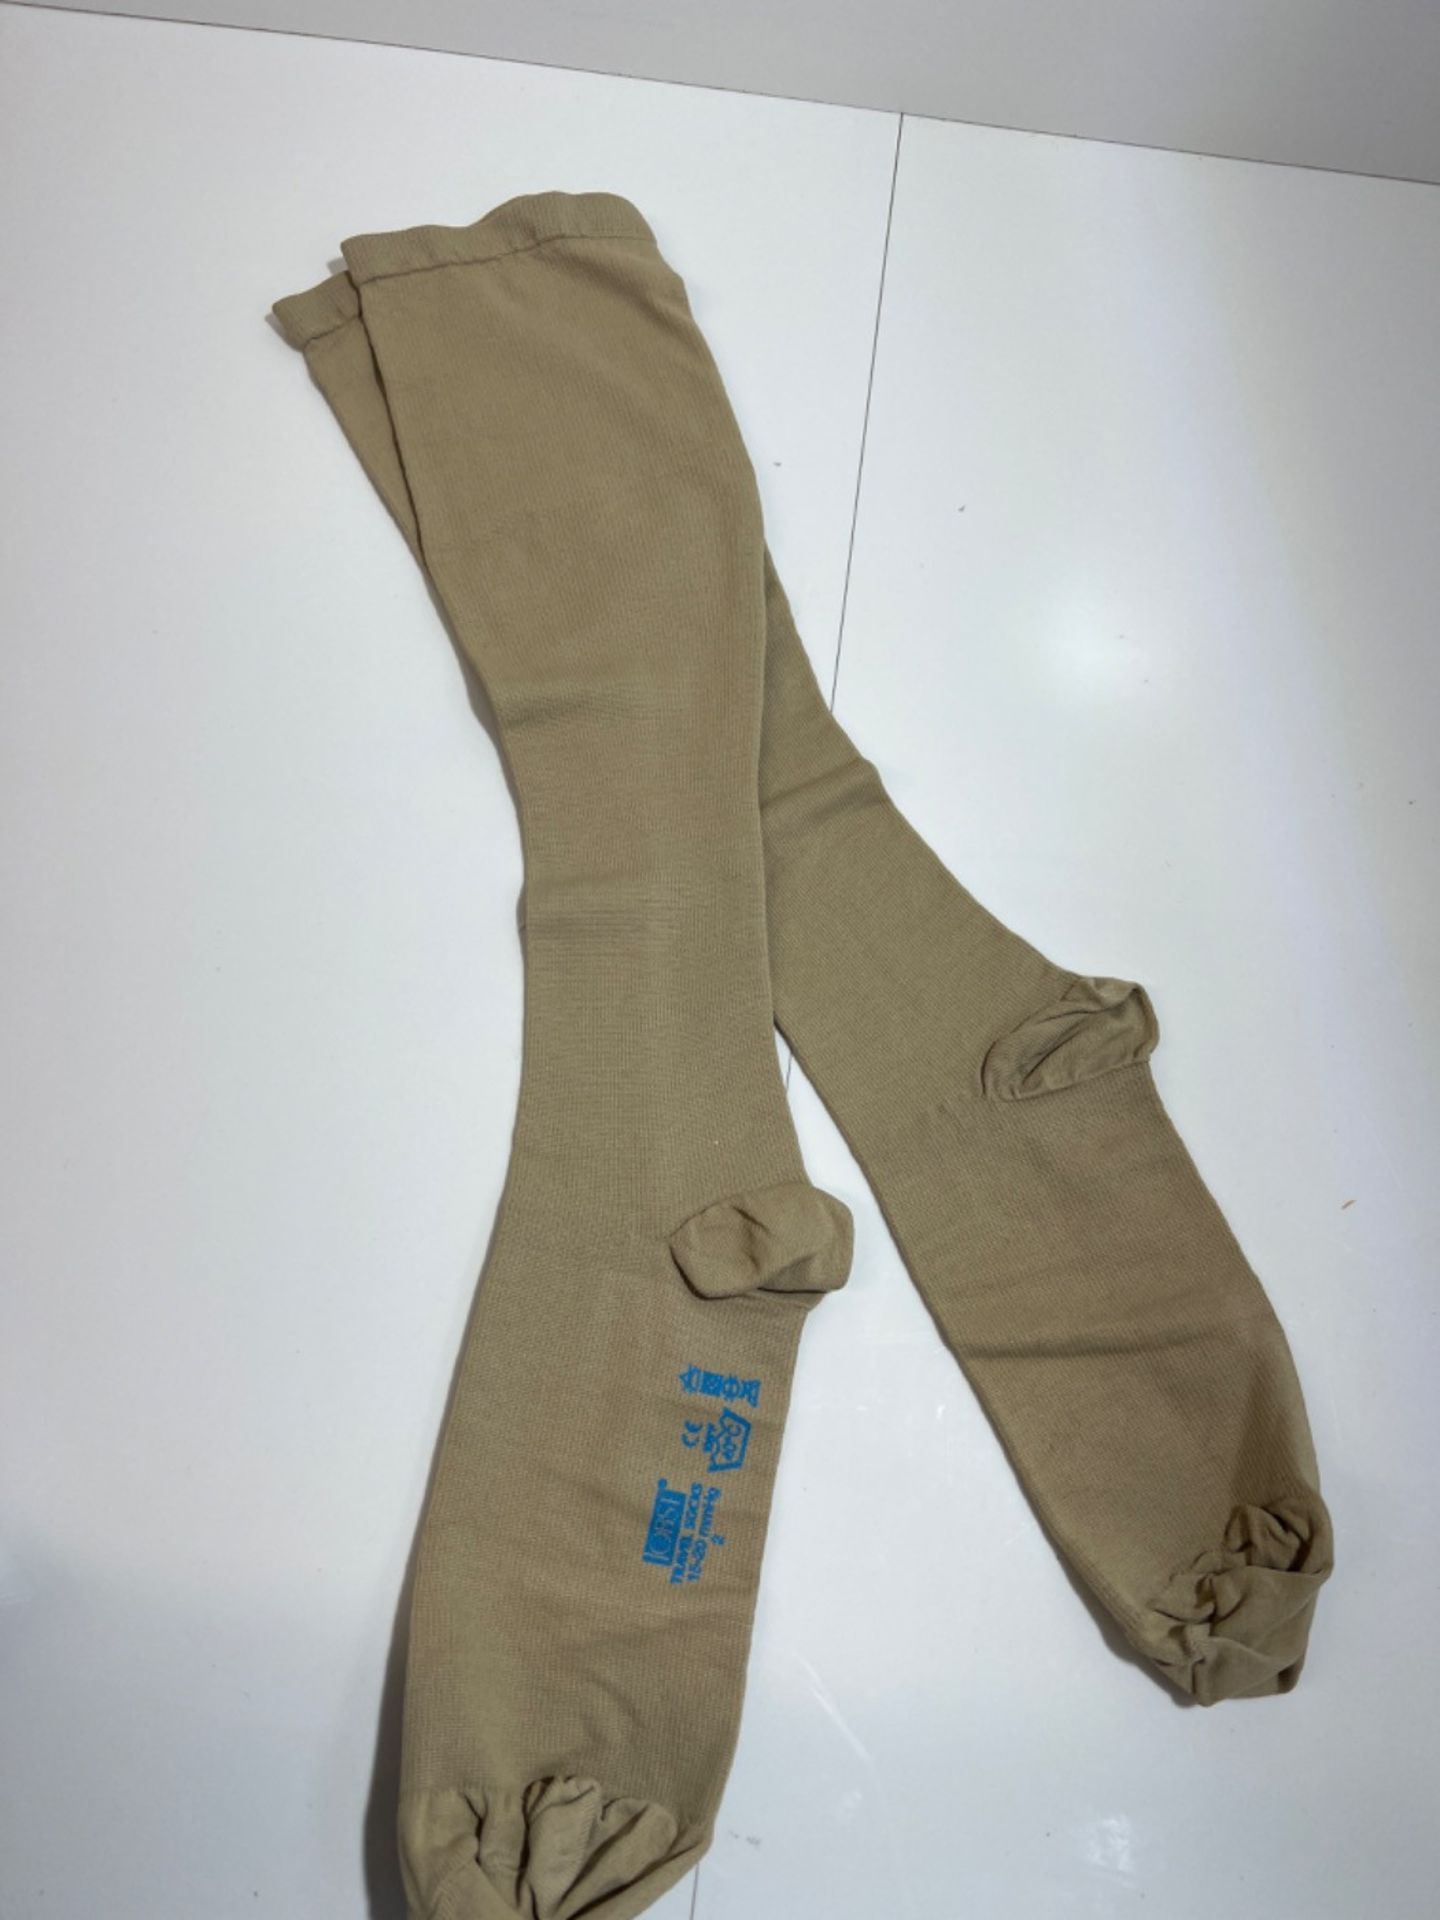 Jobst Travel Knee High Compression Socks - Helps To Prevent Deep Vein Thrombosis During Travel -... - Image 2 of 3